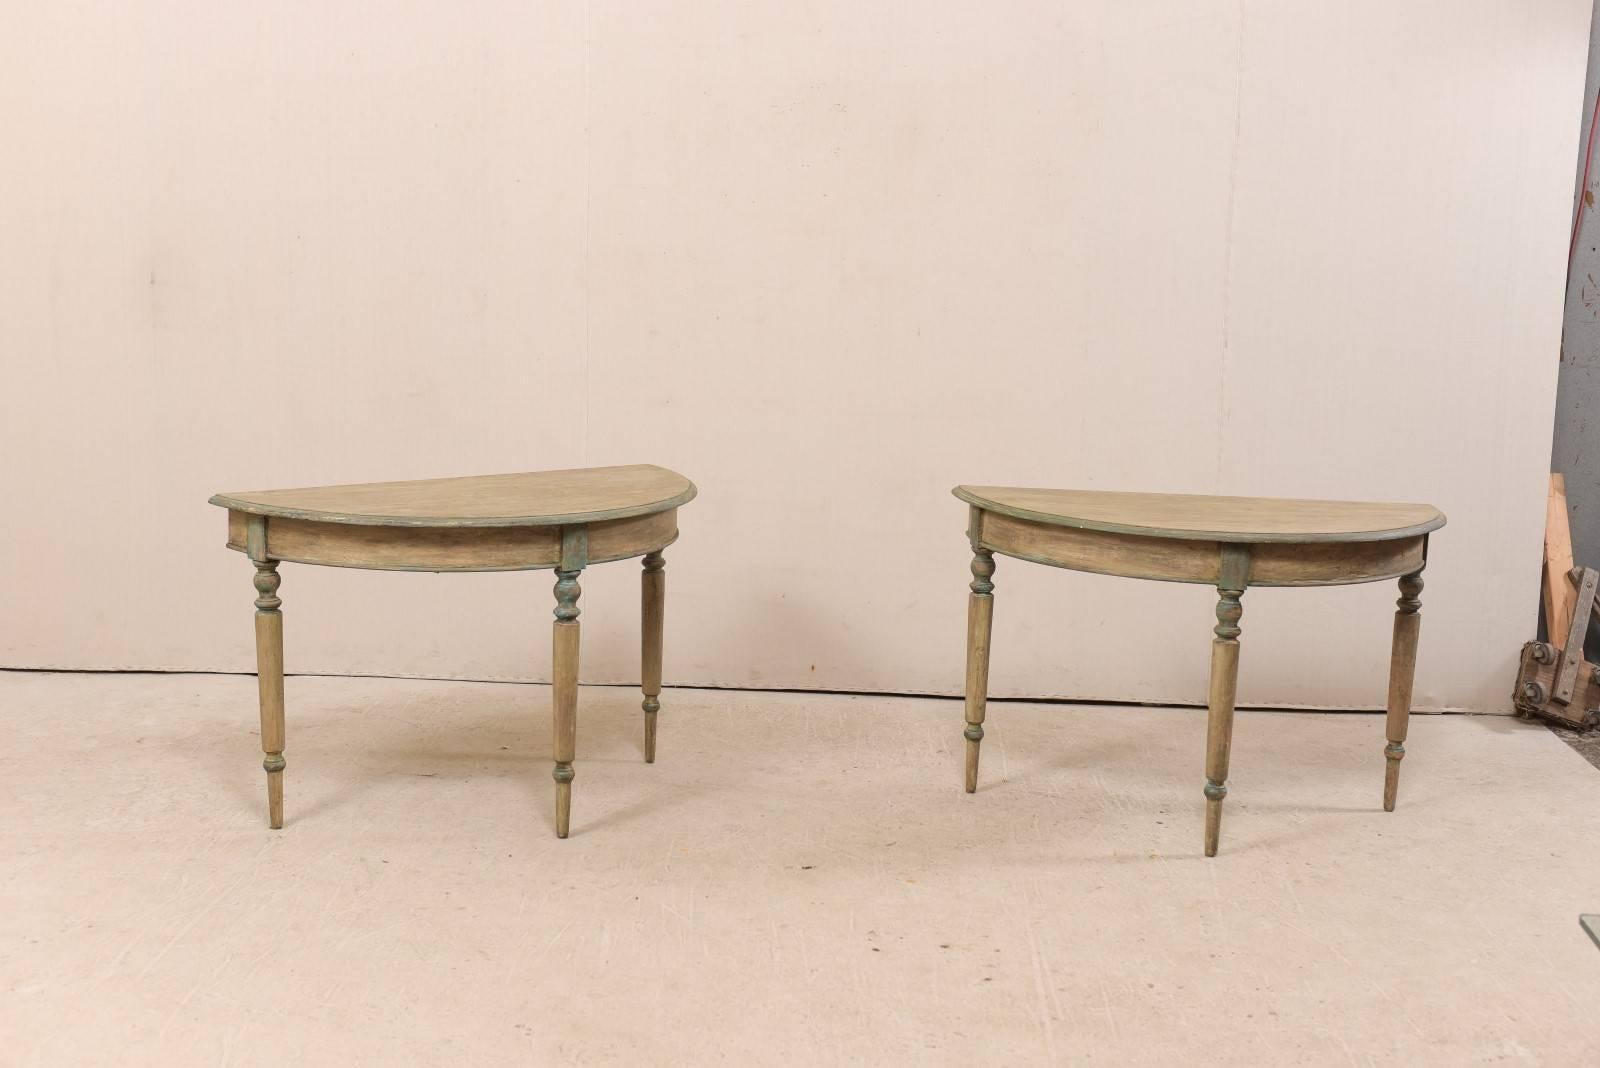 Carved Pair of 19th Century Swedish Painted Wood Demi-Lune Tables with Turned Legs